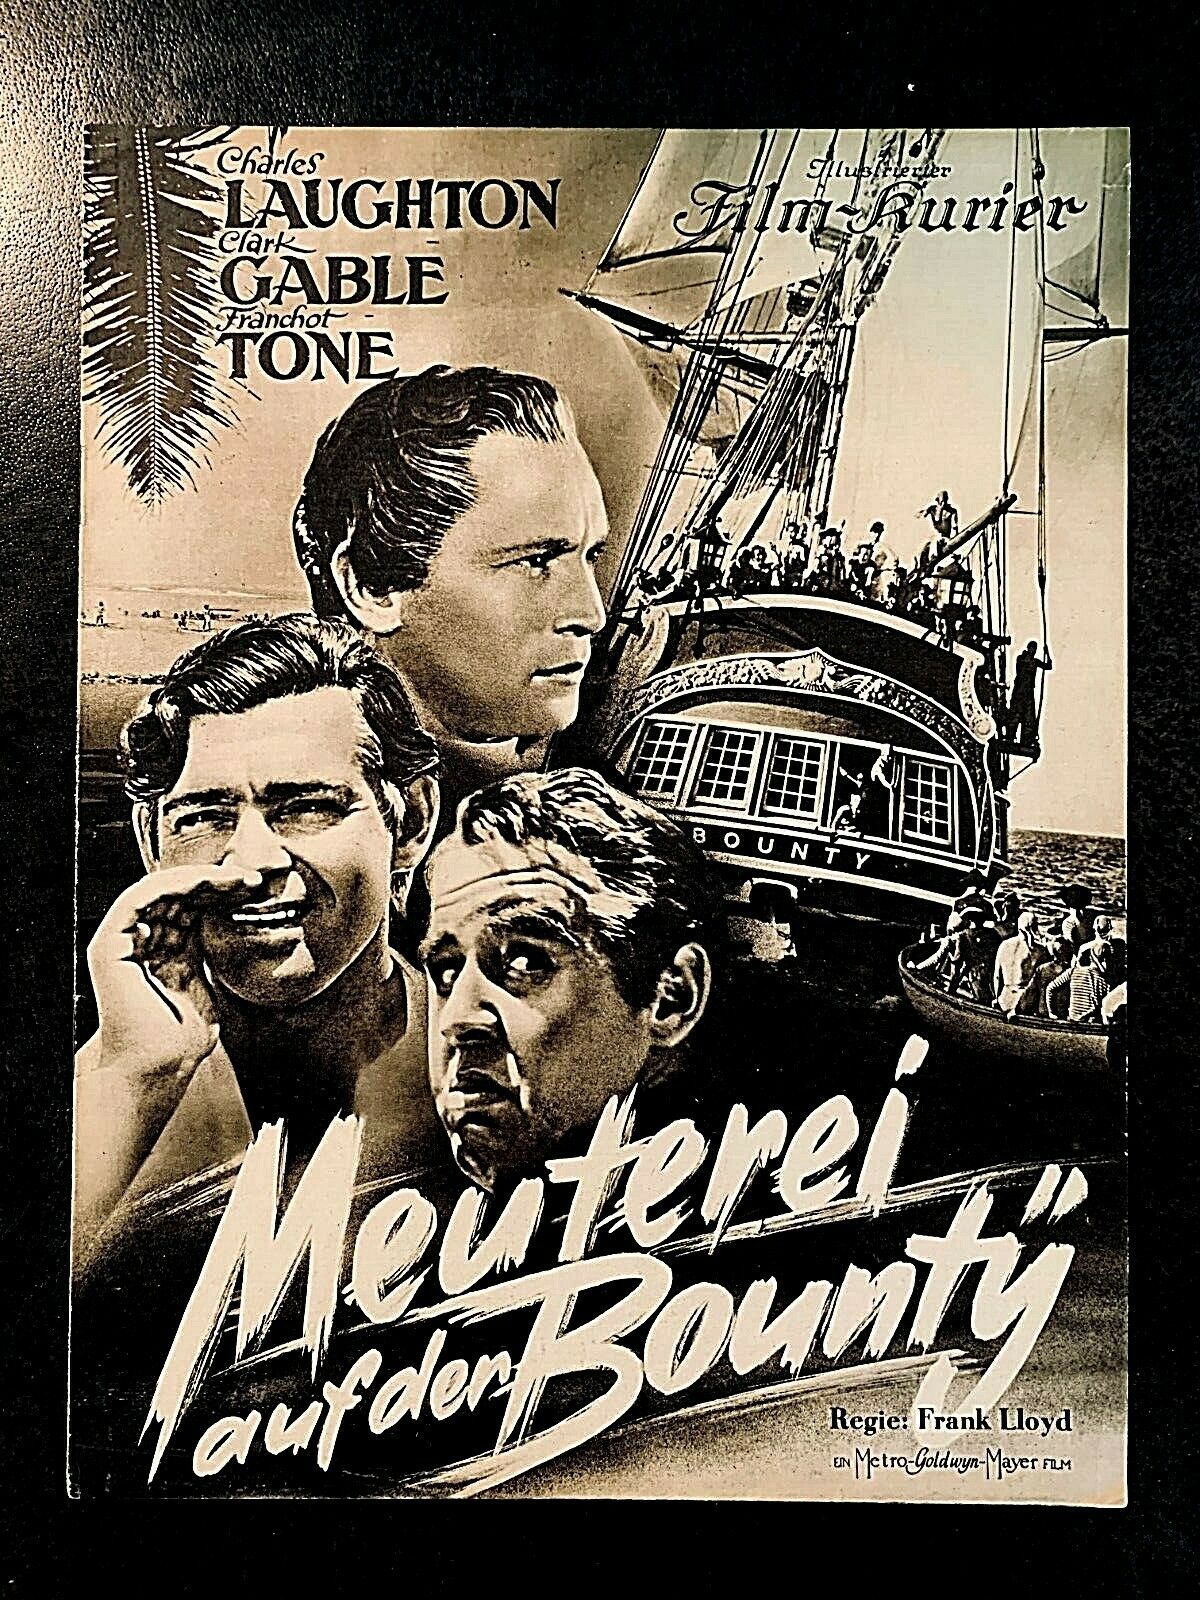 Mutiny On The Bounty 1935  - German Illustrated Film Courier No. 2520, 8 Pages